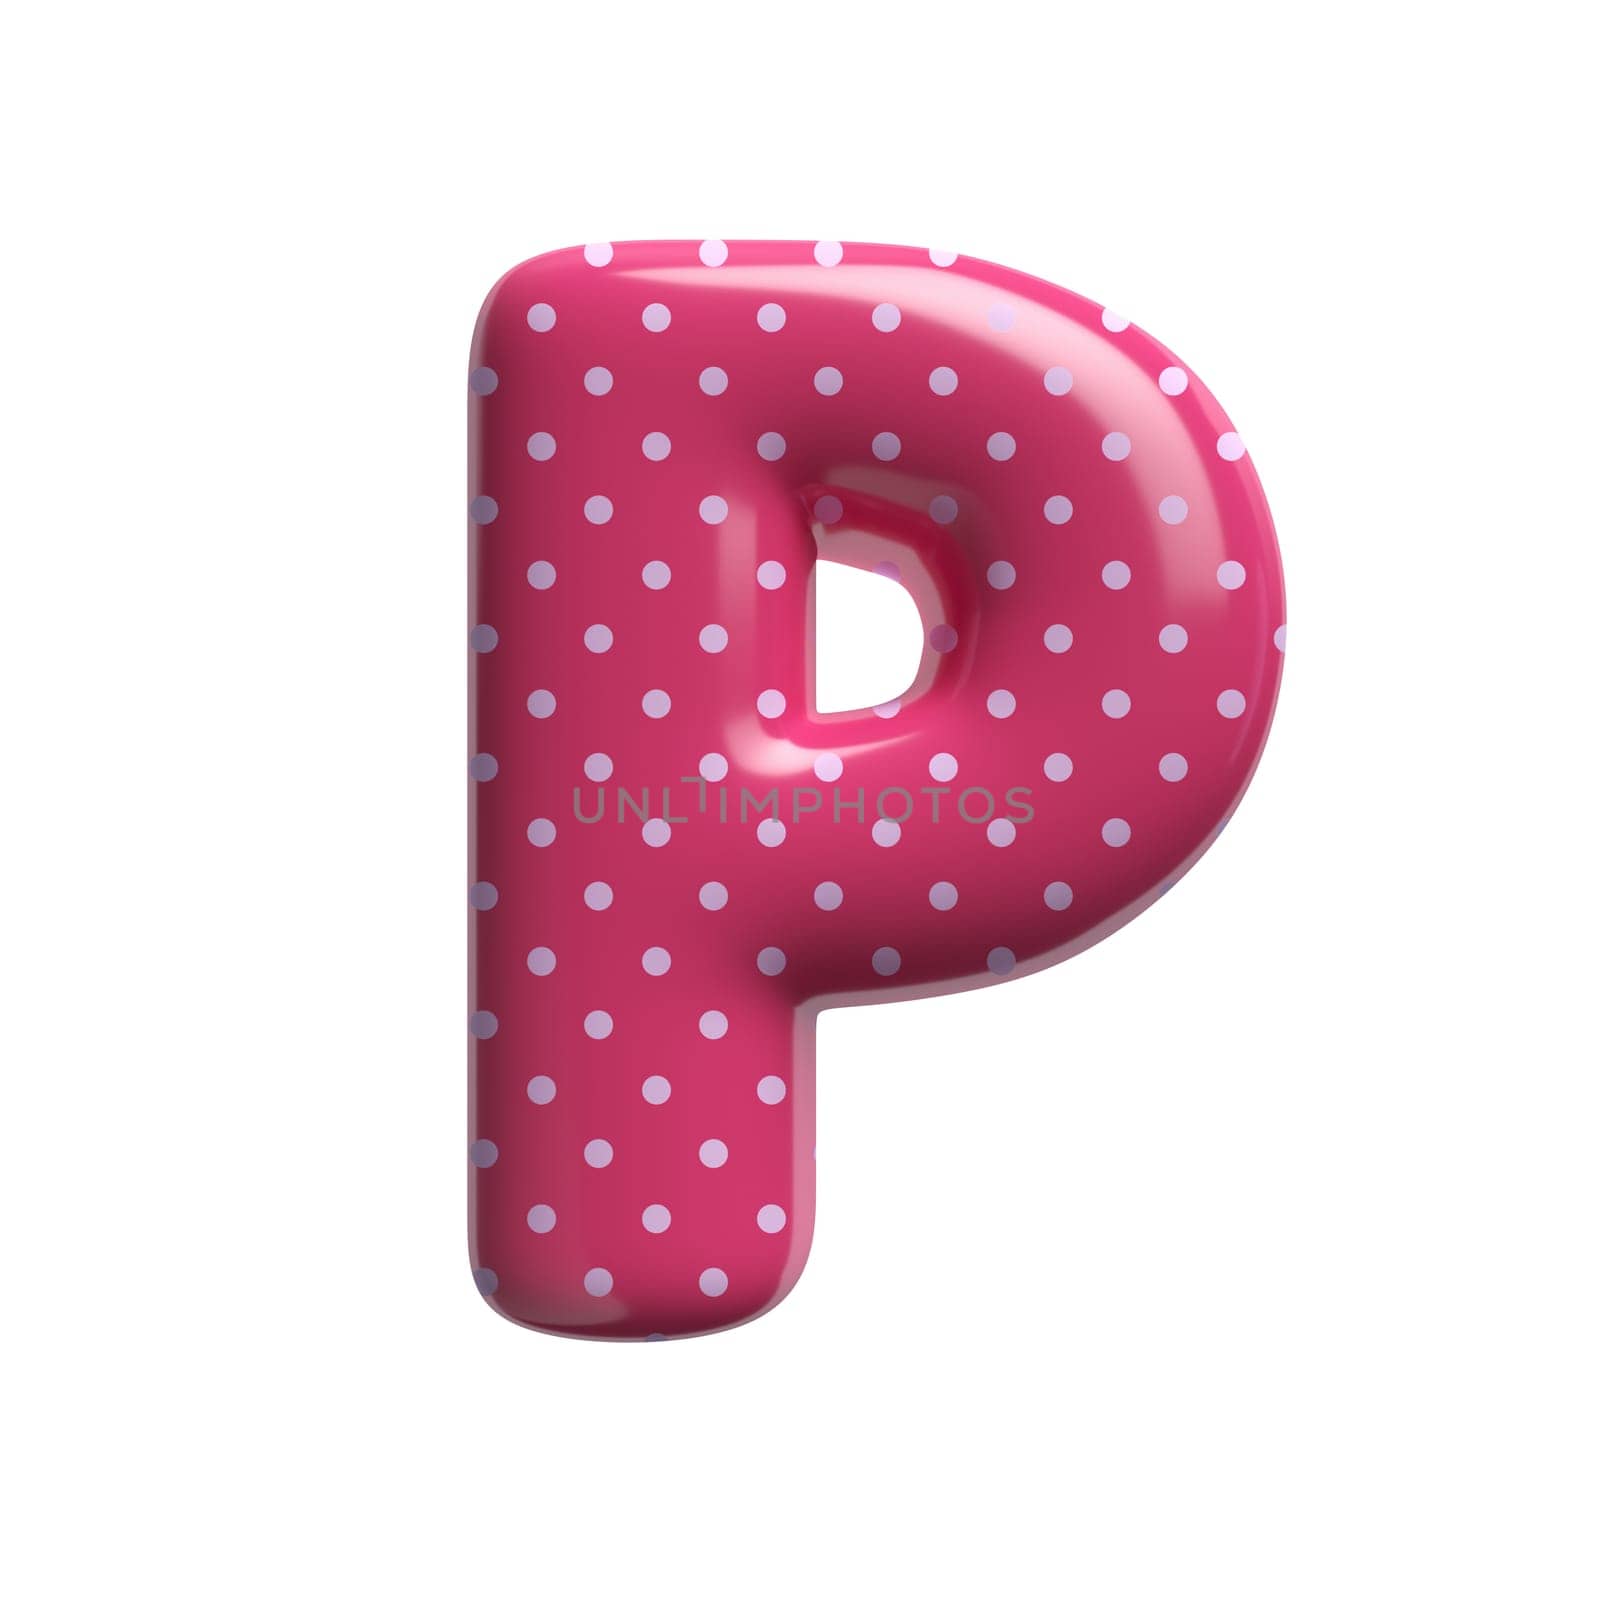 Polka dot letter P - Capital 3d pink retro font isolated on white background. This alphabet is perfect for creative illustrations related but not limited to Fashion, retro design, decoration...